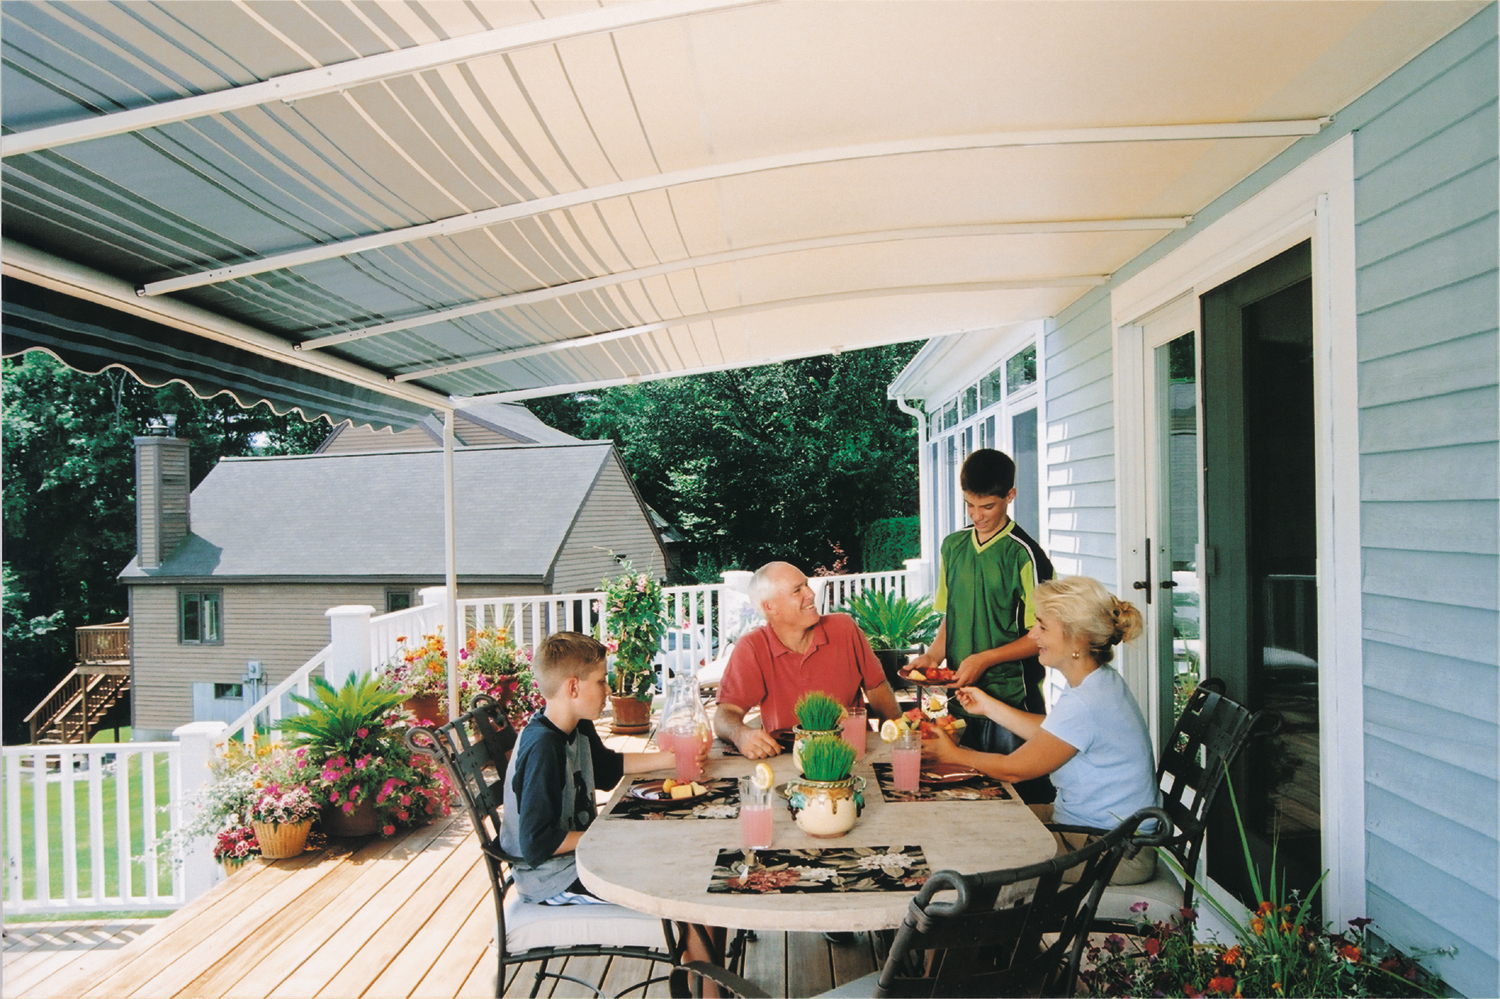 Retractable Awning Features ABC Windows And More